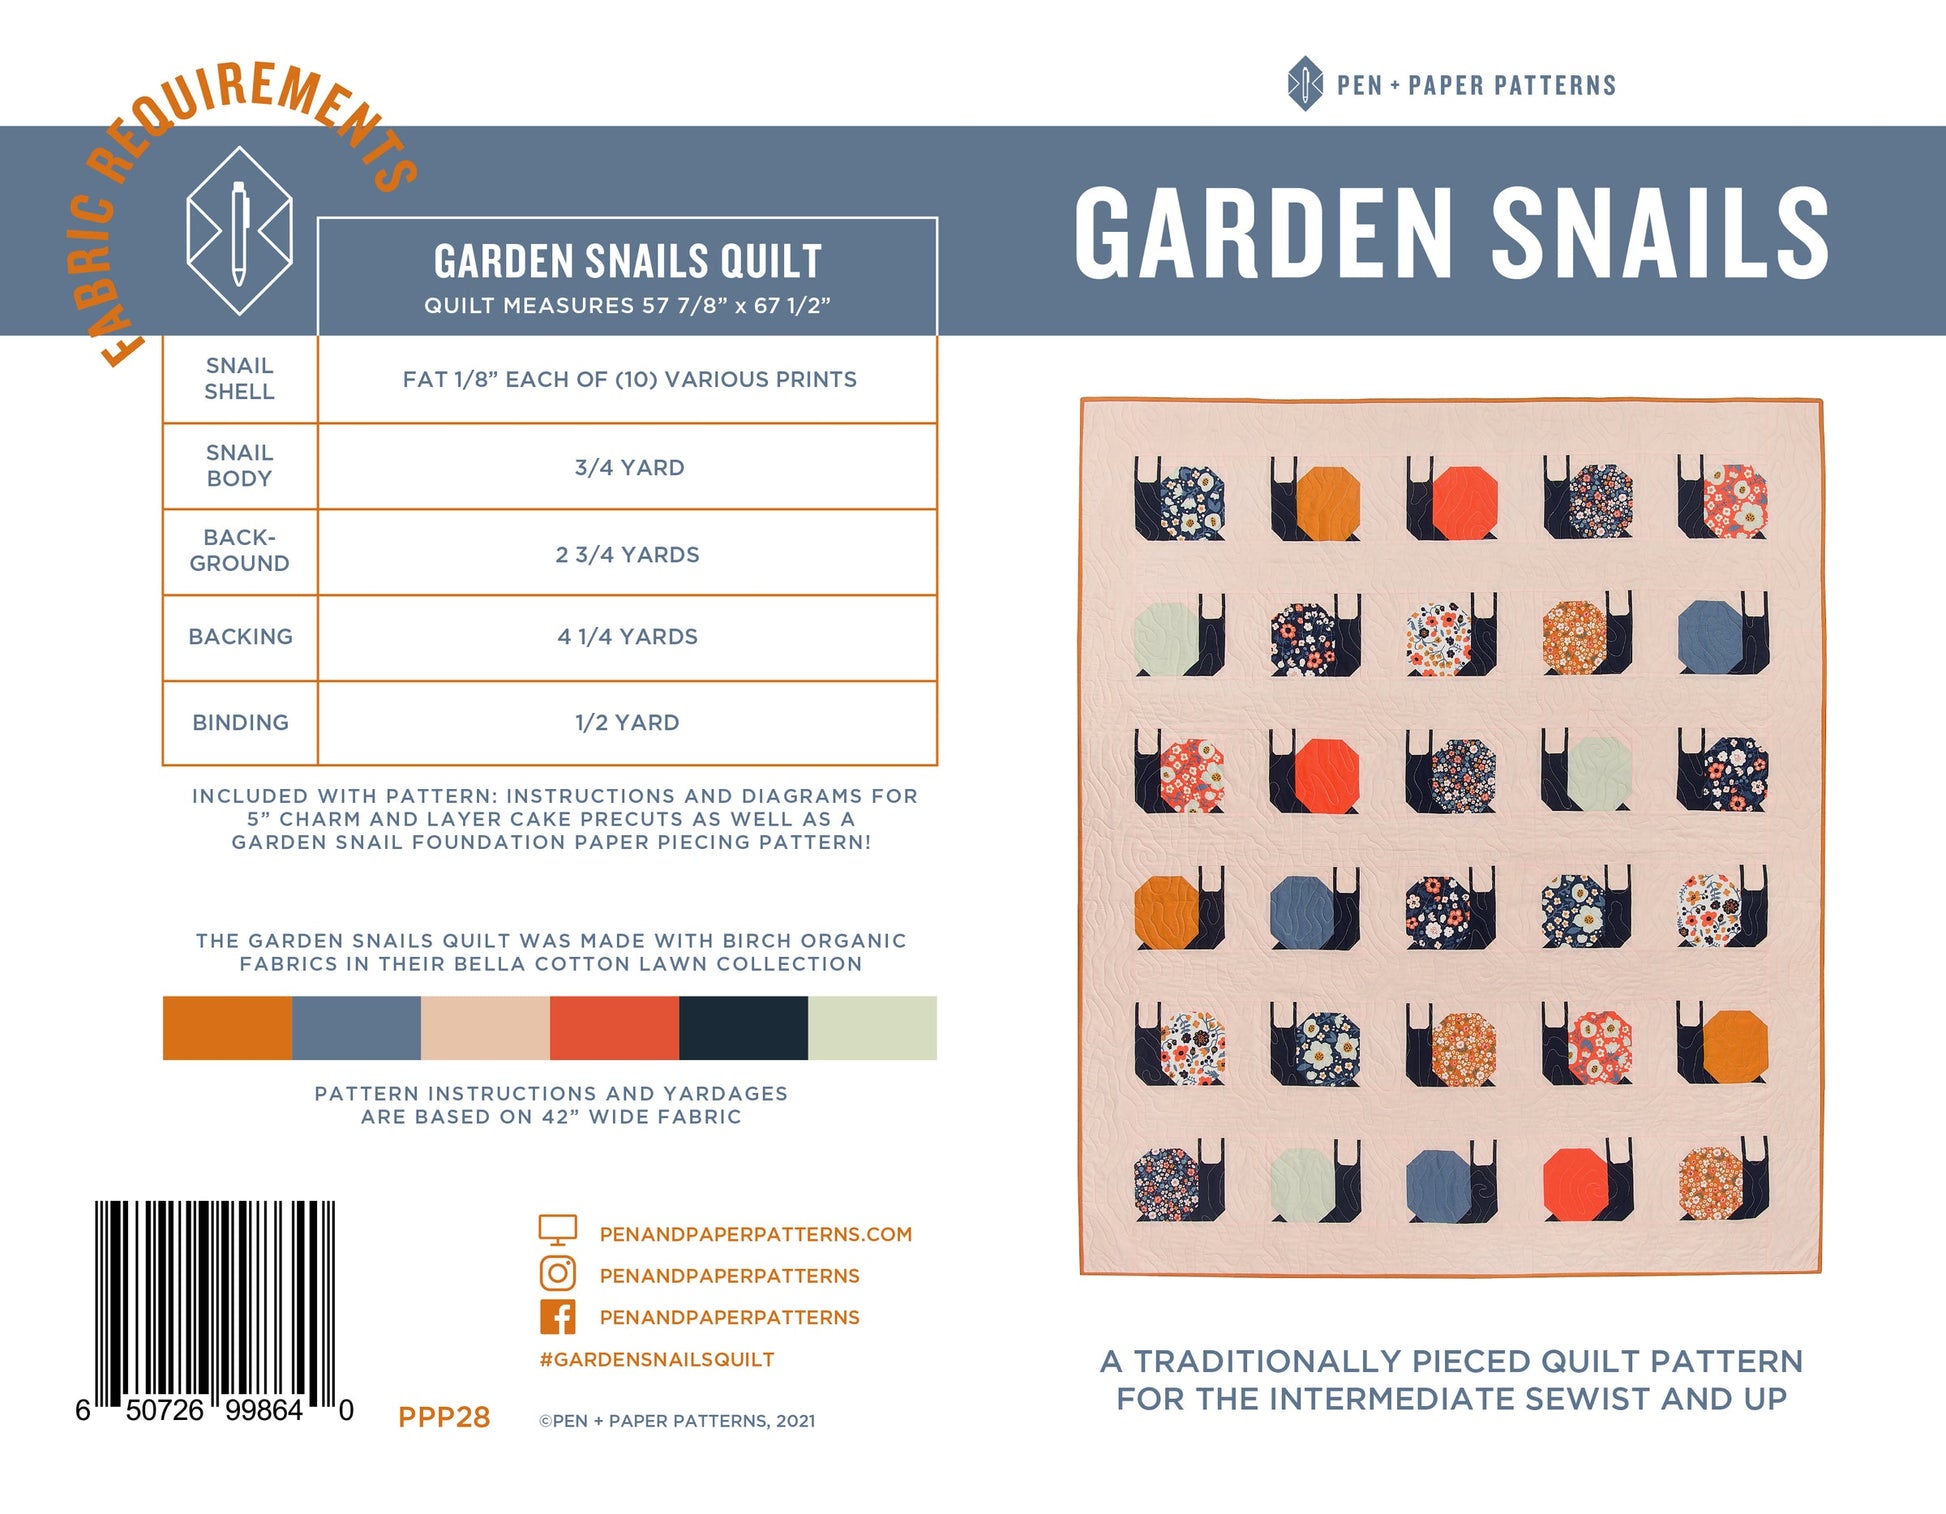 Other Garden Snails Quilt Pattern by Pen + Paper Patterns - Printed Booklet